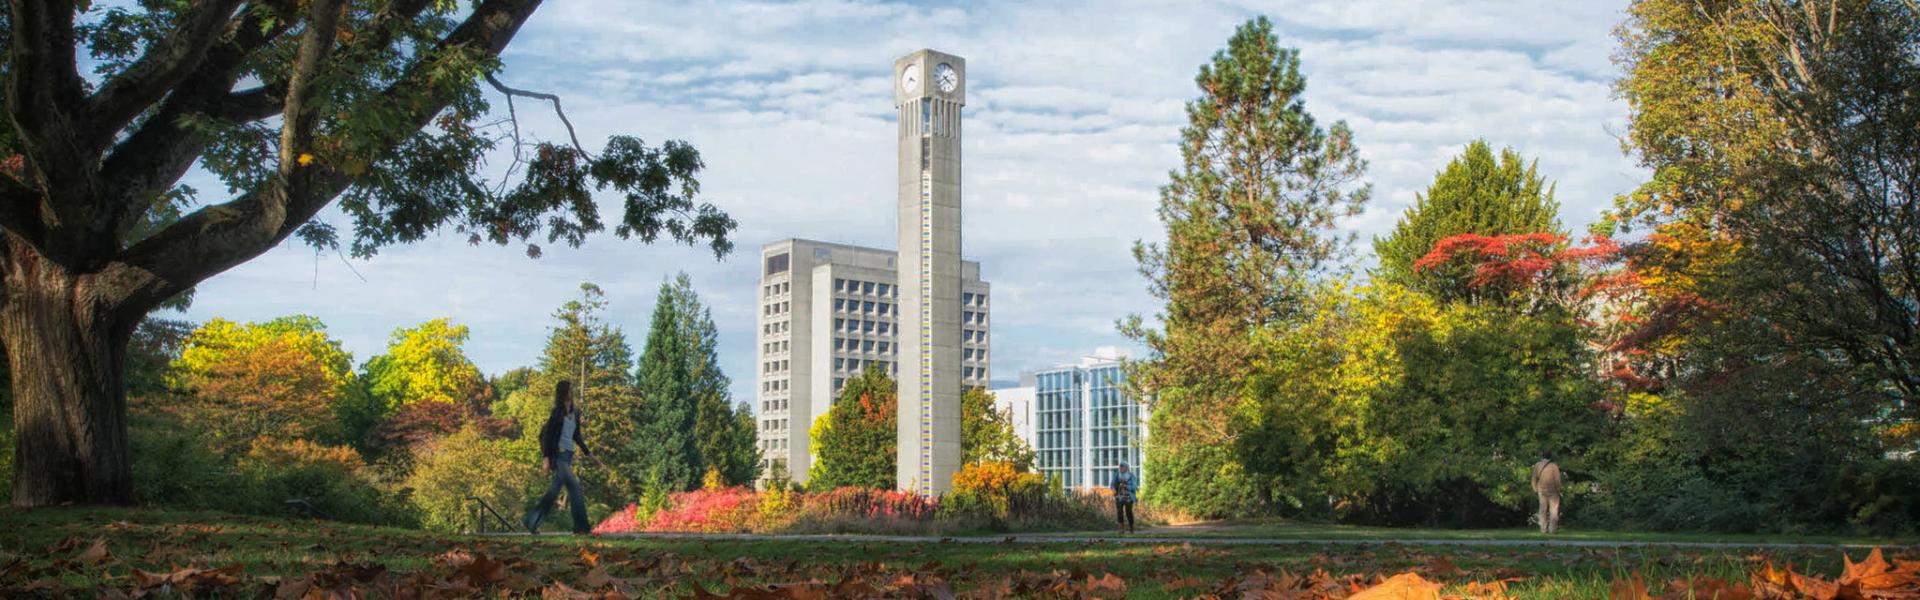 Fall leaves and the Clocktower at UBC Vancouver campus (photo: Don Erhardt / UBC Brand & Marketing)